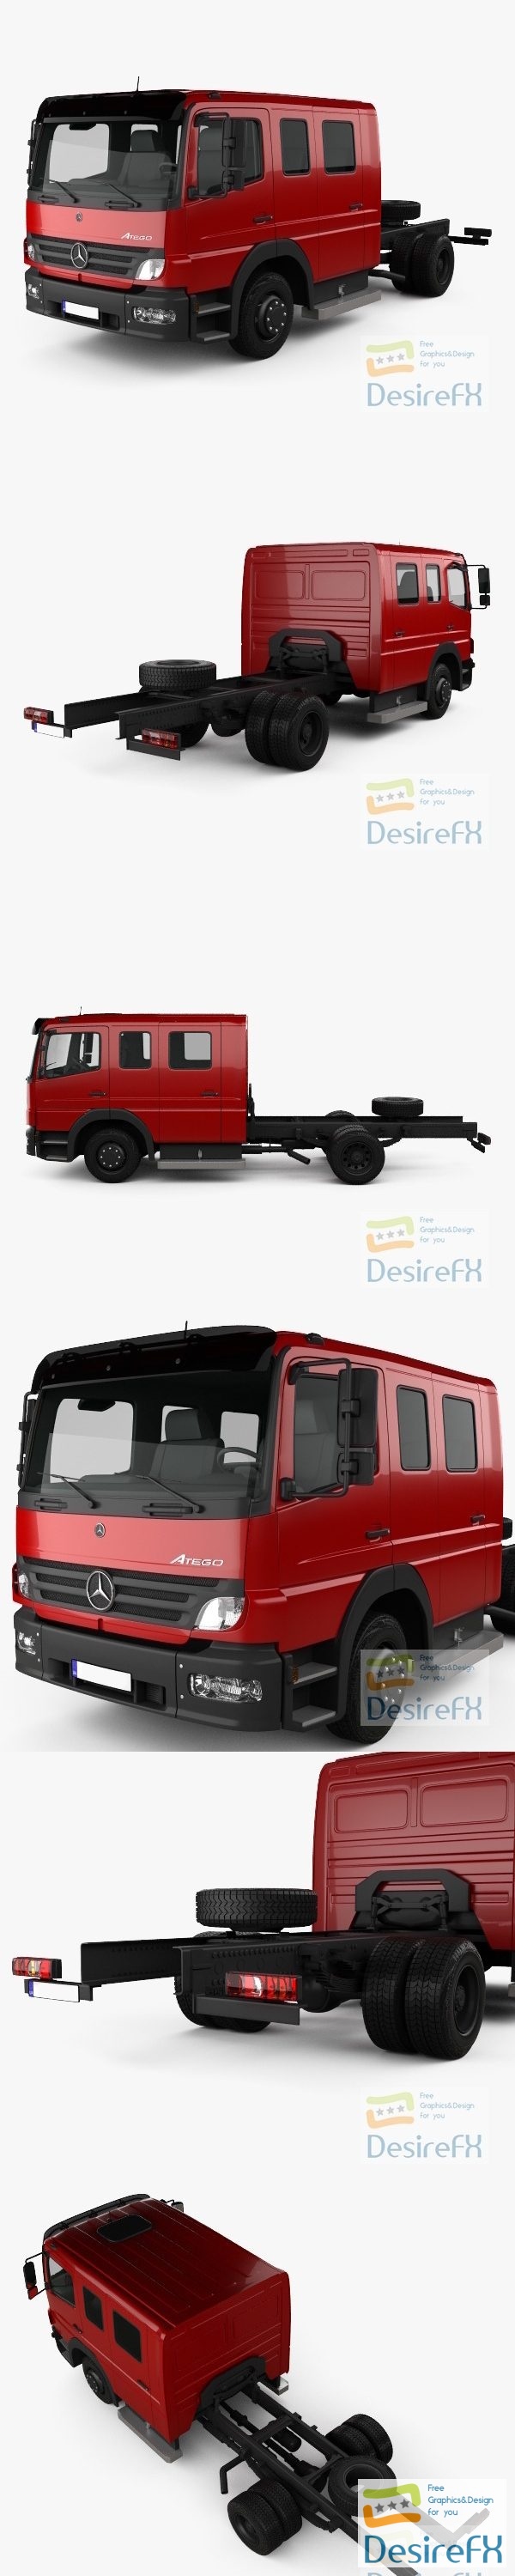 Mercedes-Benz Atego Crew Cab Chassis Truck 2004 3D Model